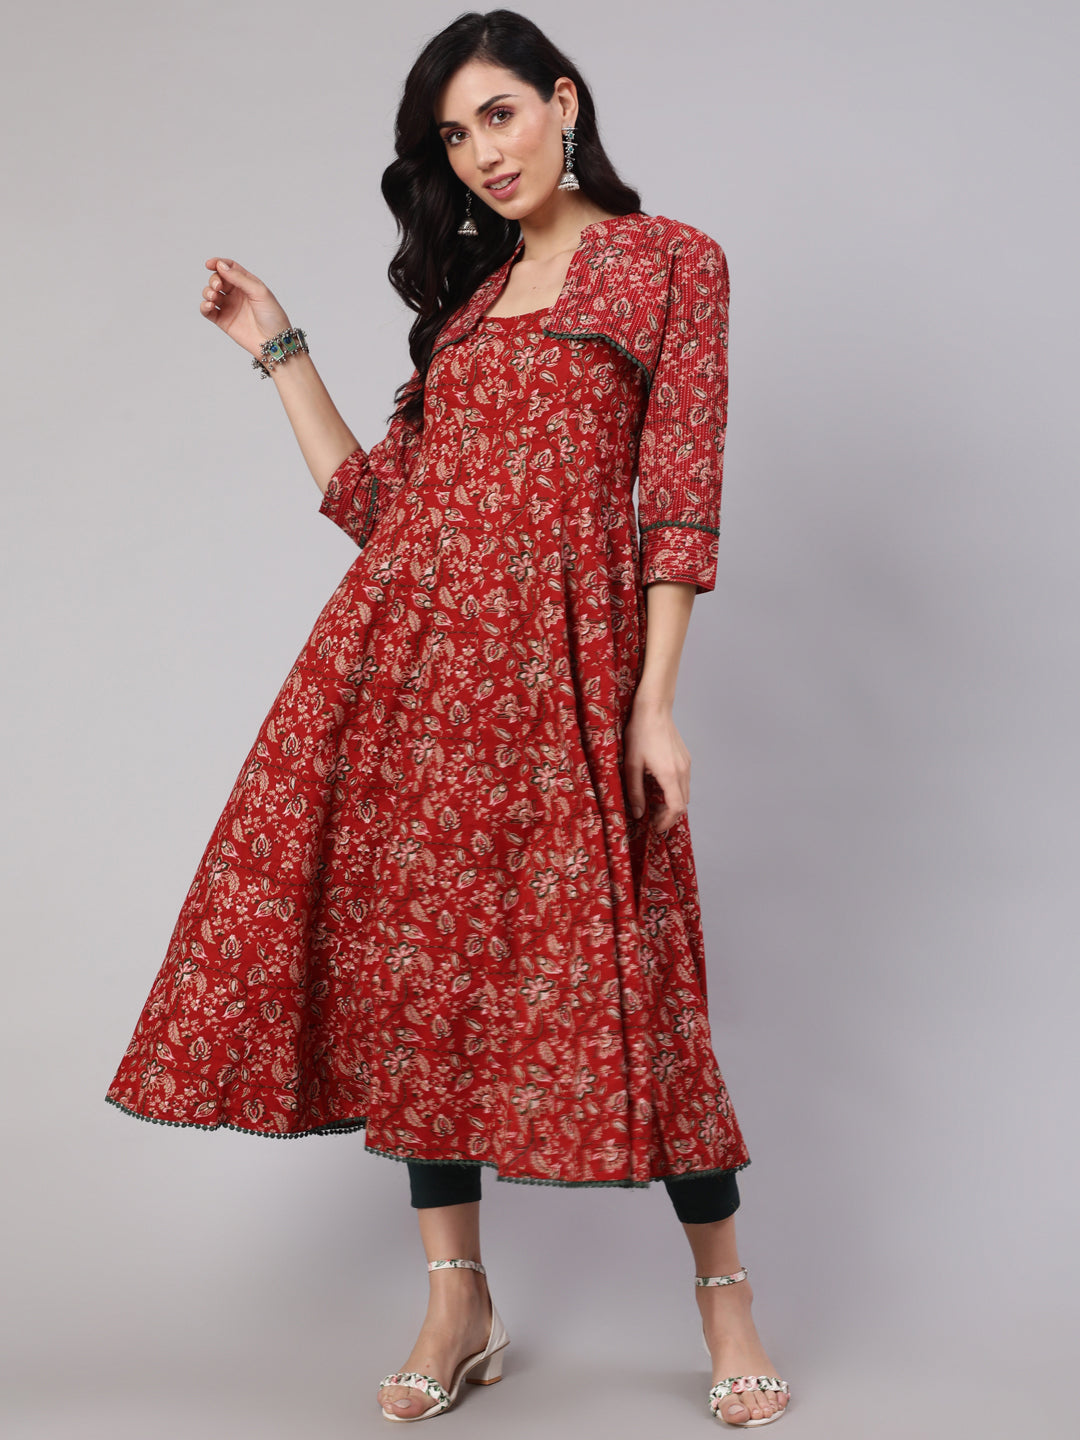 Women's Red Floral Print Flared Anarkali With Crop Jacket - Aks